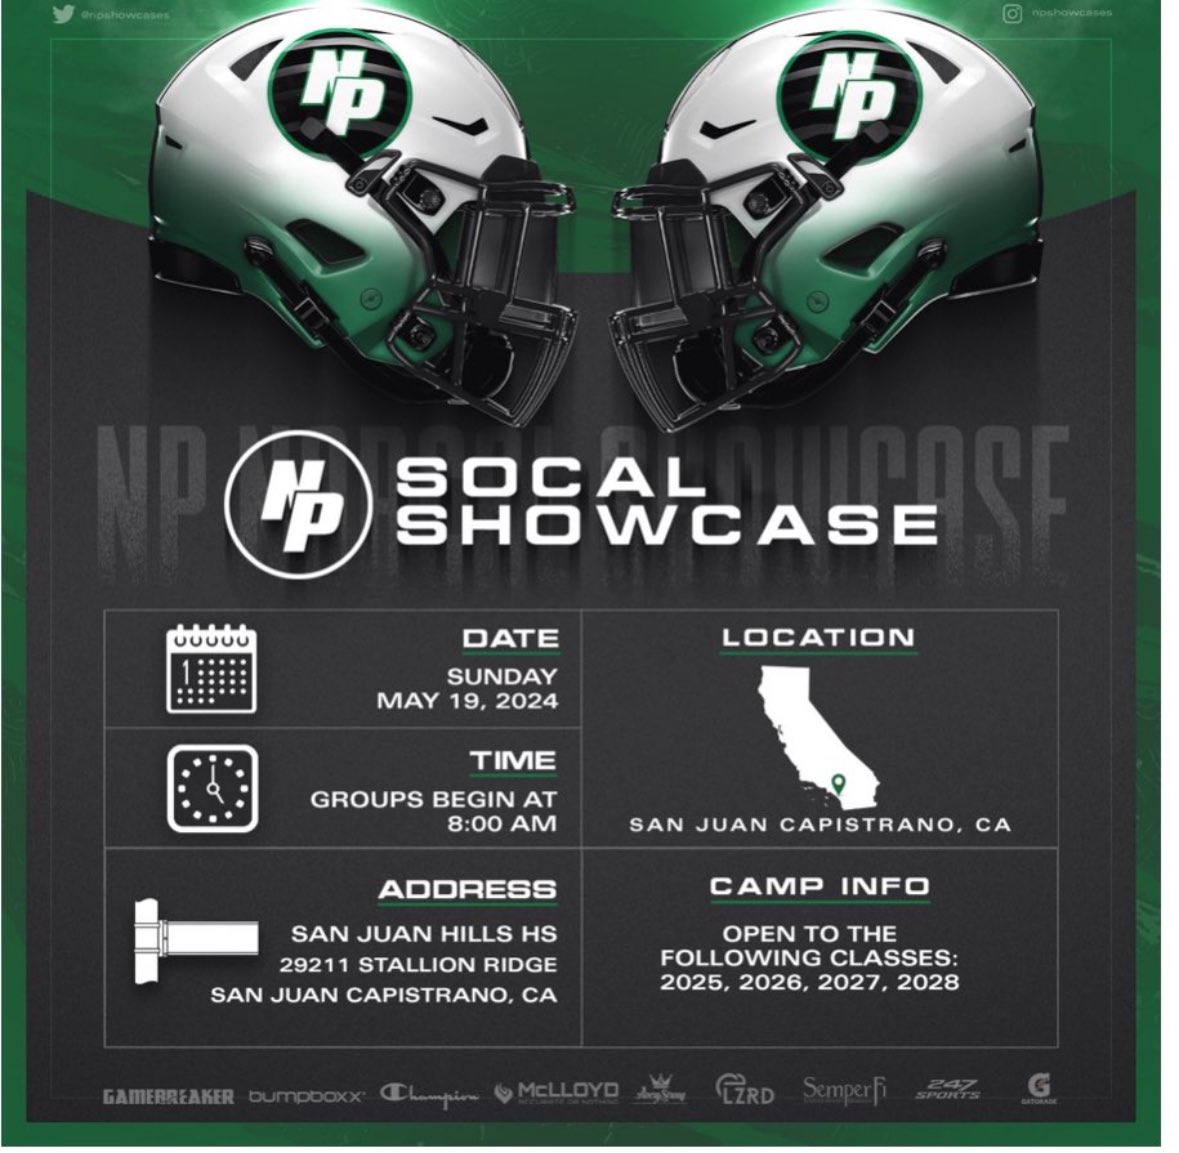 Ready to compete today at the @NPShowcases in SoCal. @PGregorian @GregBiggins @BrandonHuffman @247Sports @CoachDanny10 @OLuFootball @ttherzog @QBHitList @TheUCReport